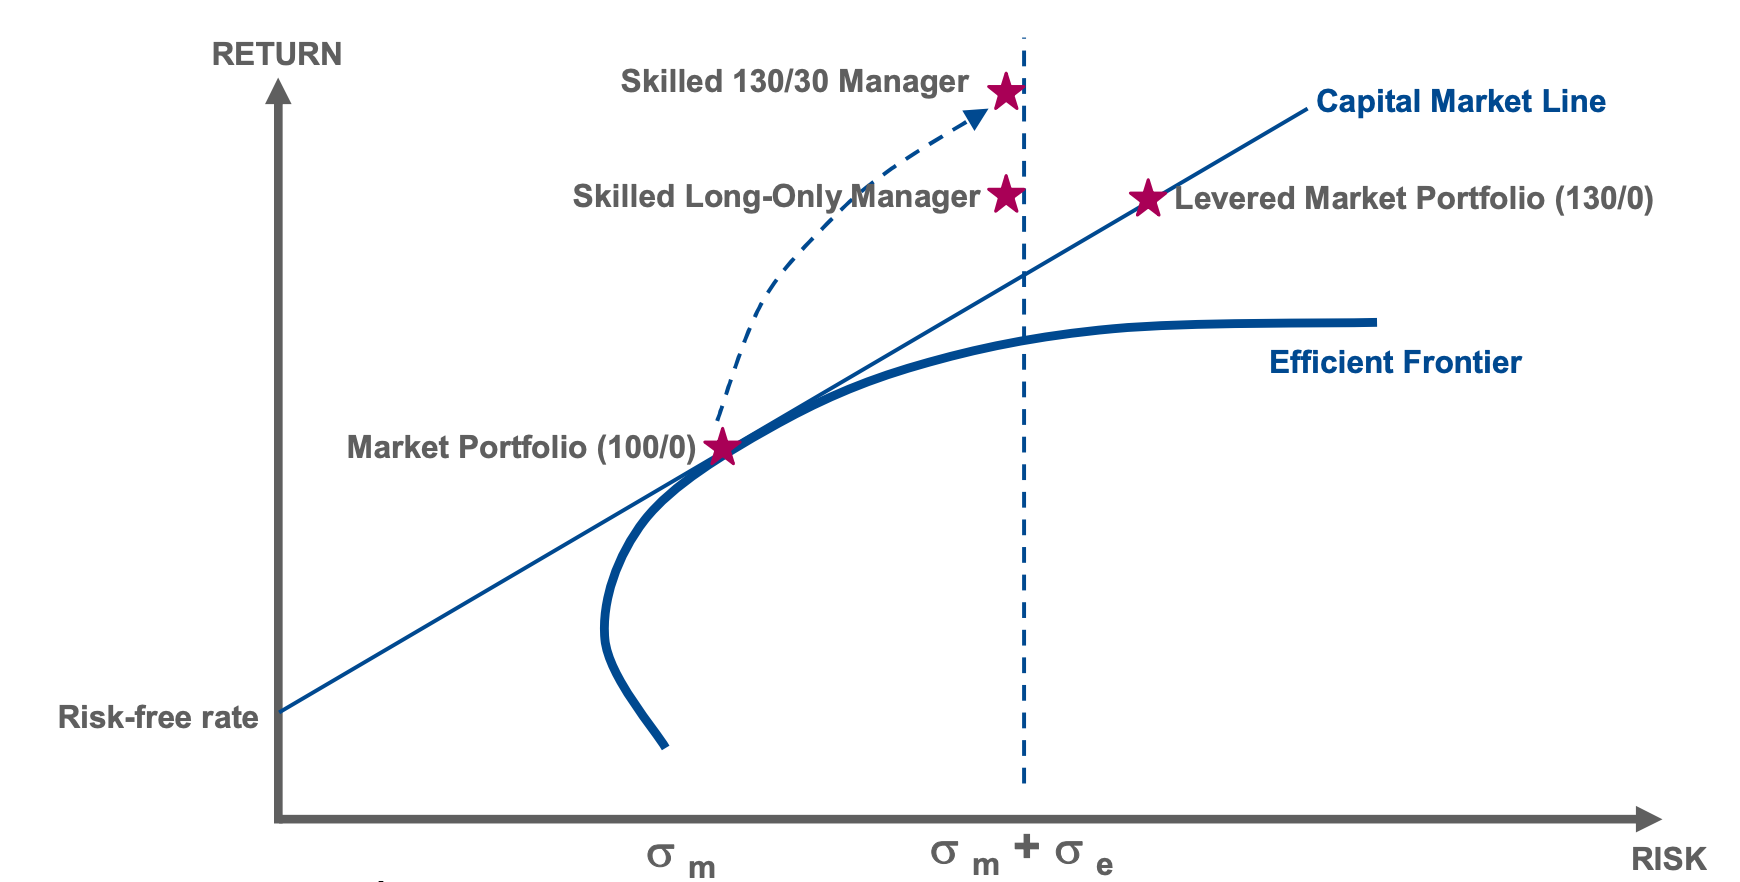 Skilled 130/30 Manager with regards to returns and risk efficient frontier